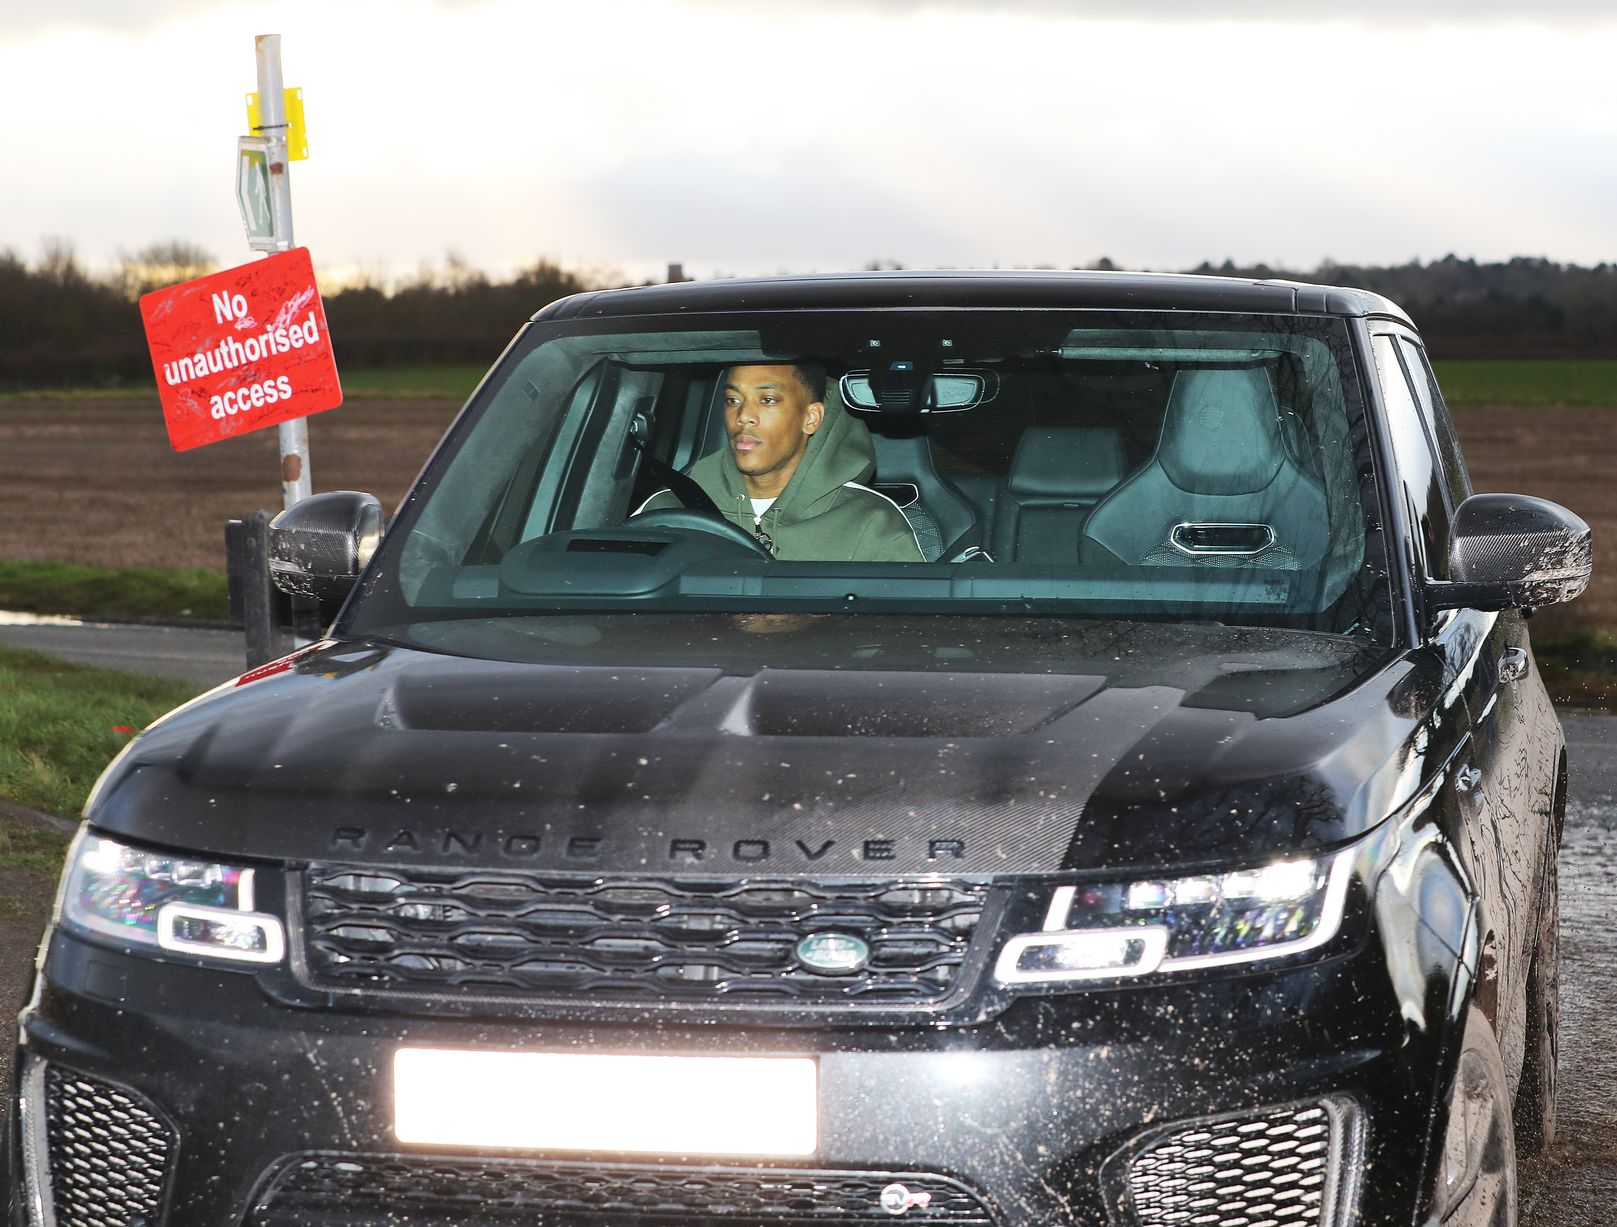 Ashley Young and Harry Maguire arrive for Manchester United training - Bóng Đá